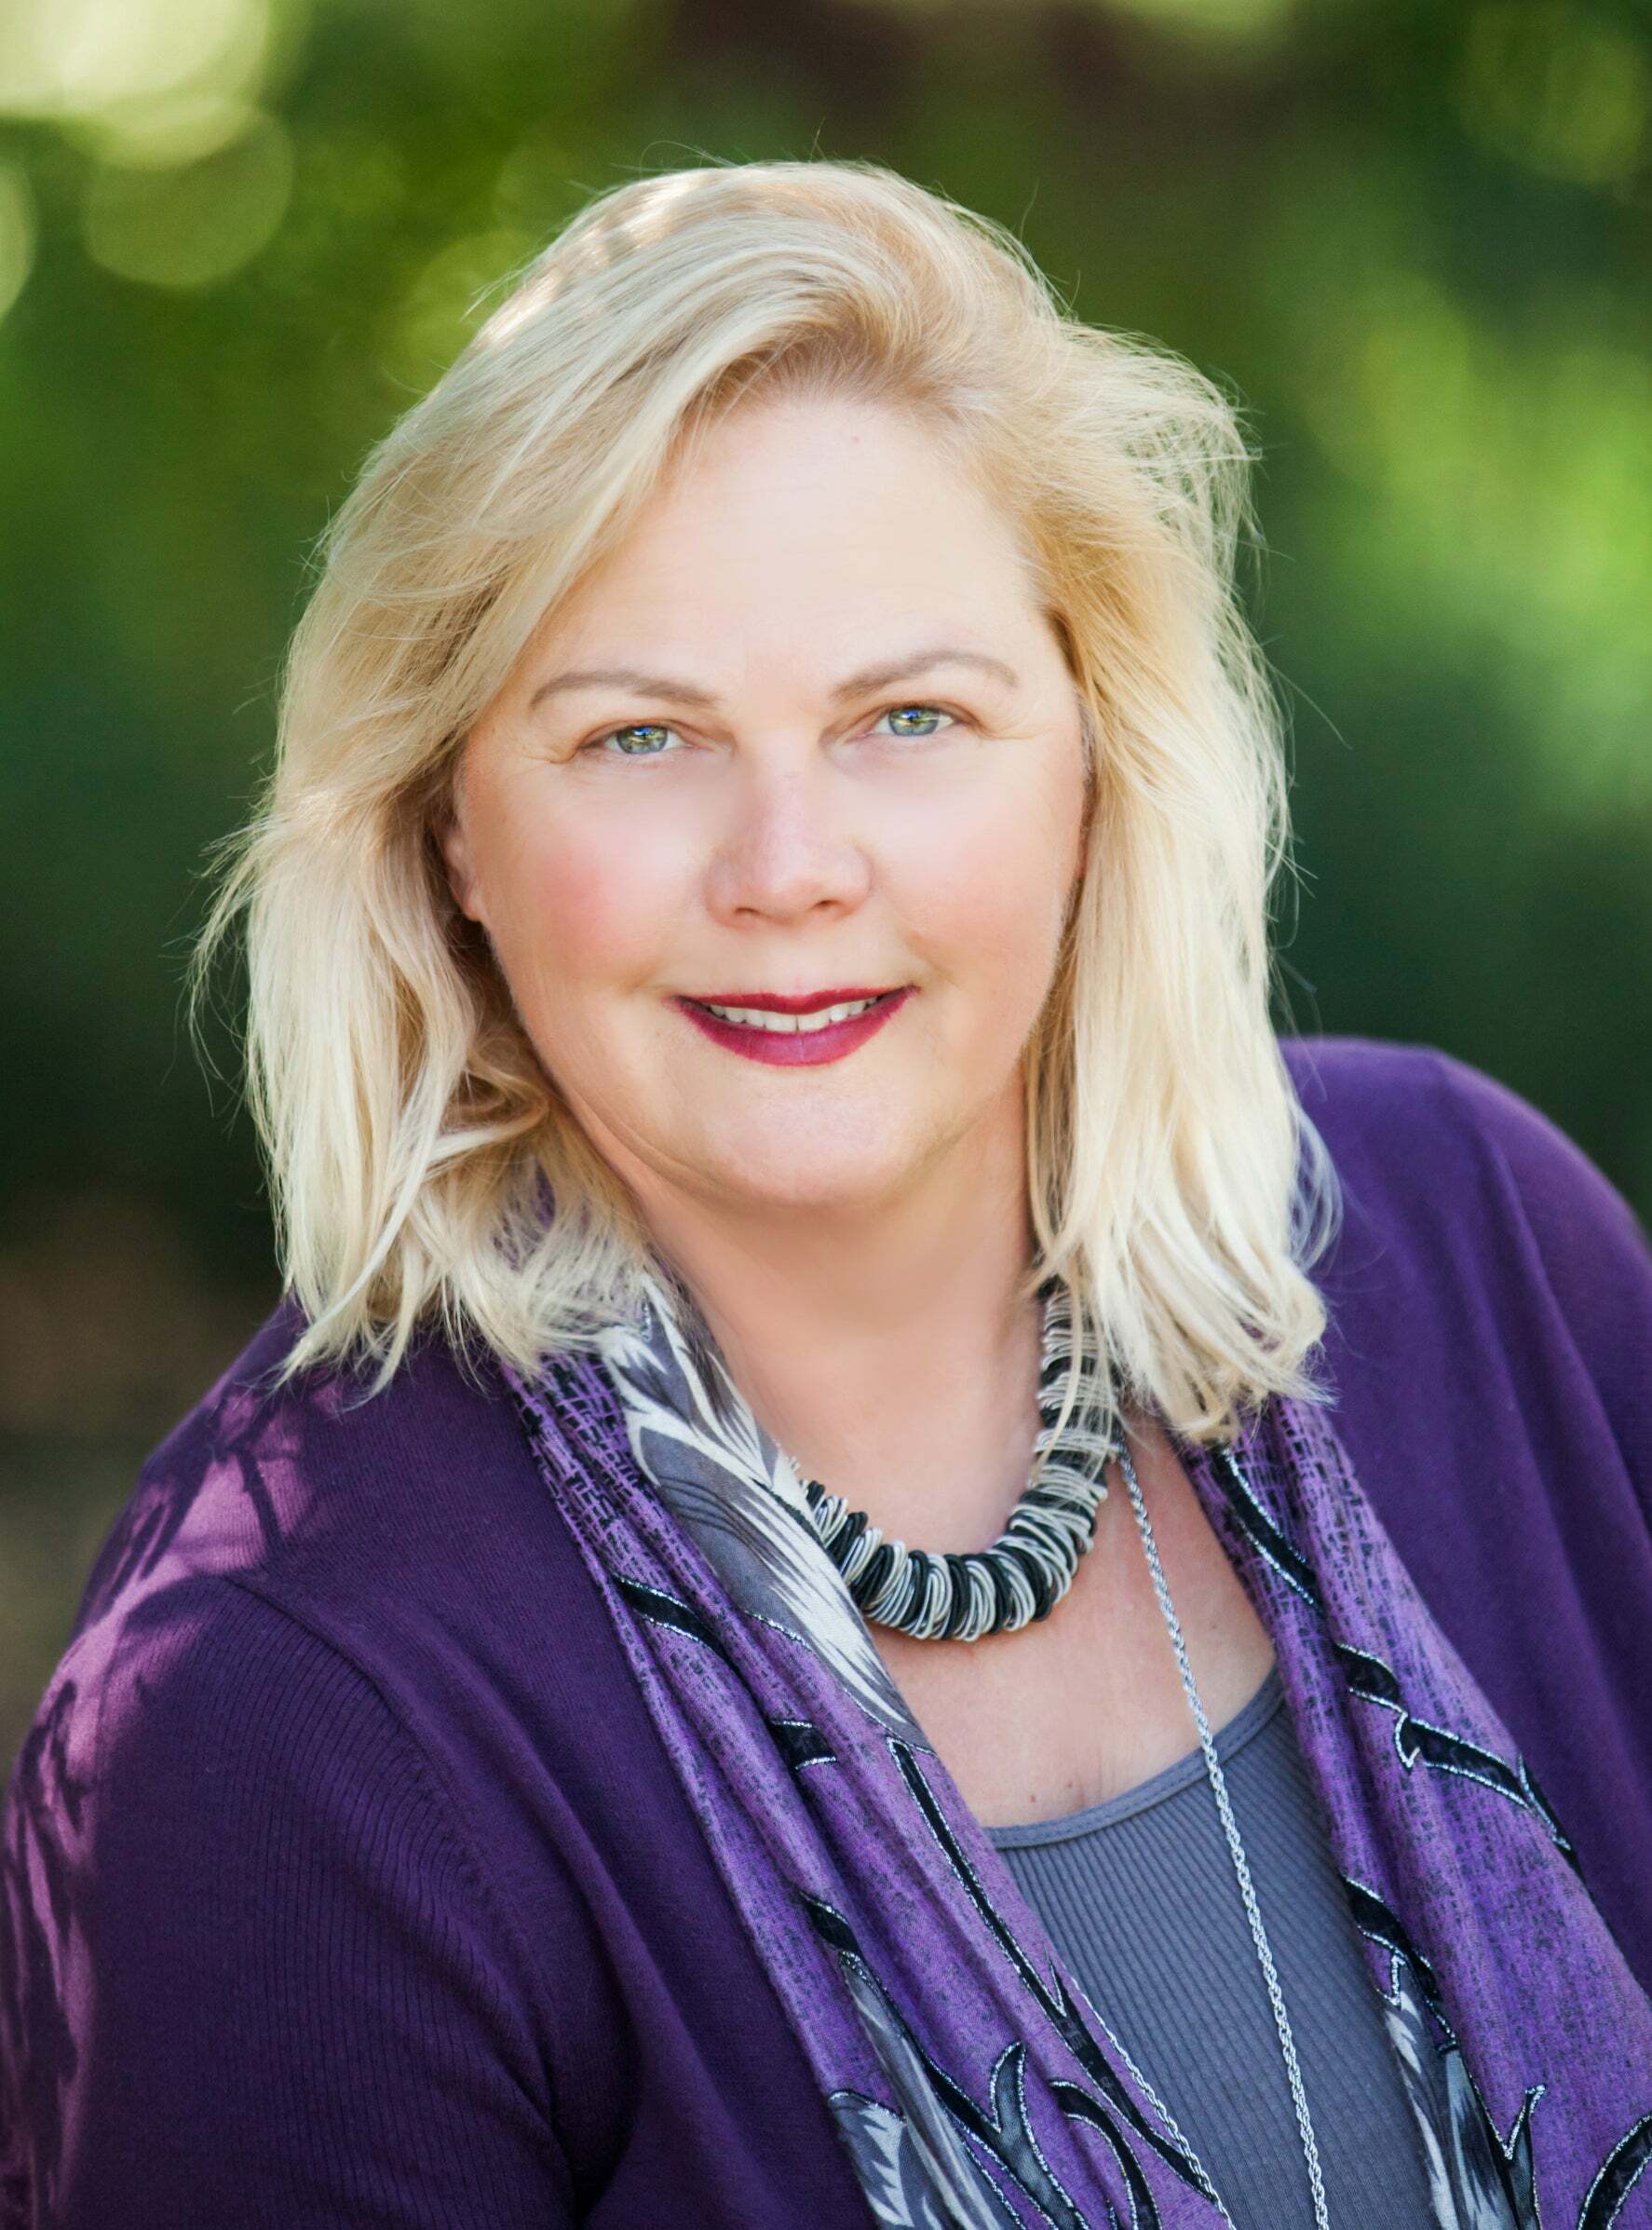 Victoria Curtis, Real Estate Salesperson in Berkeley, Reliance Partners